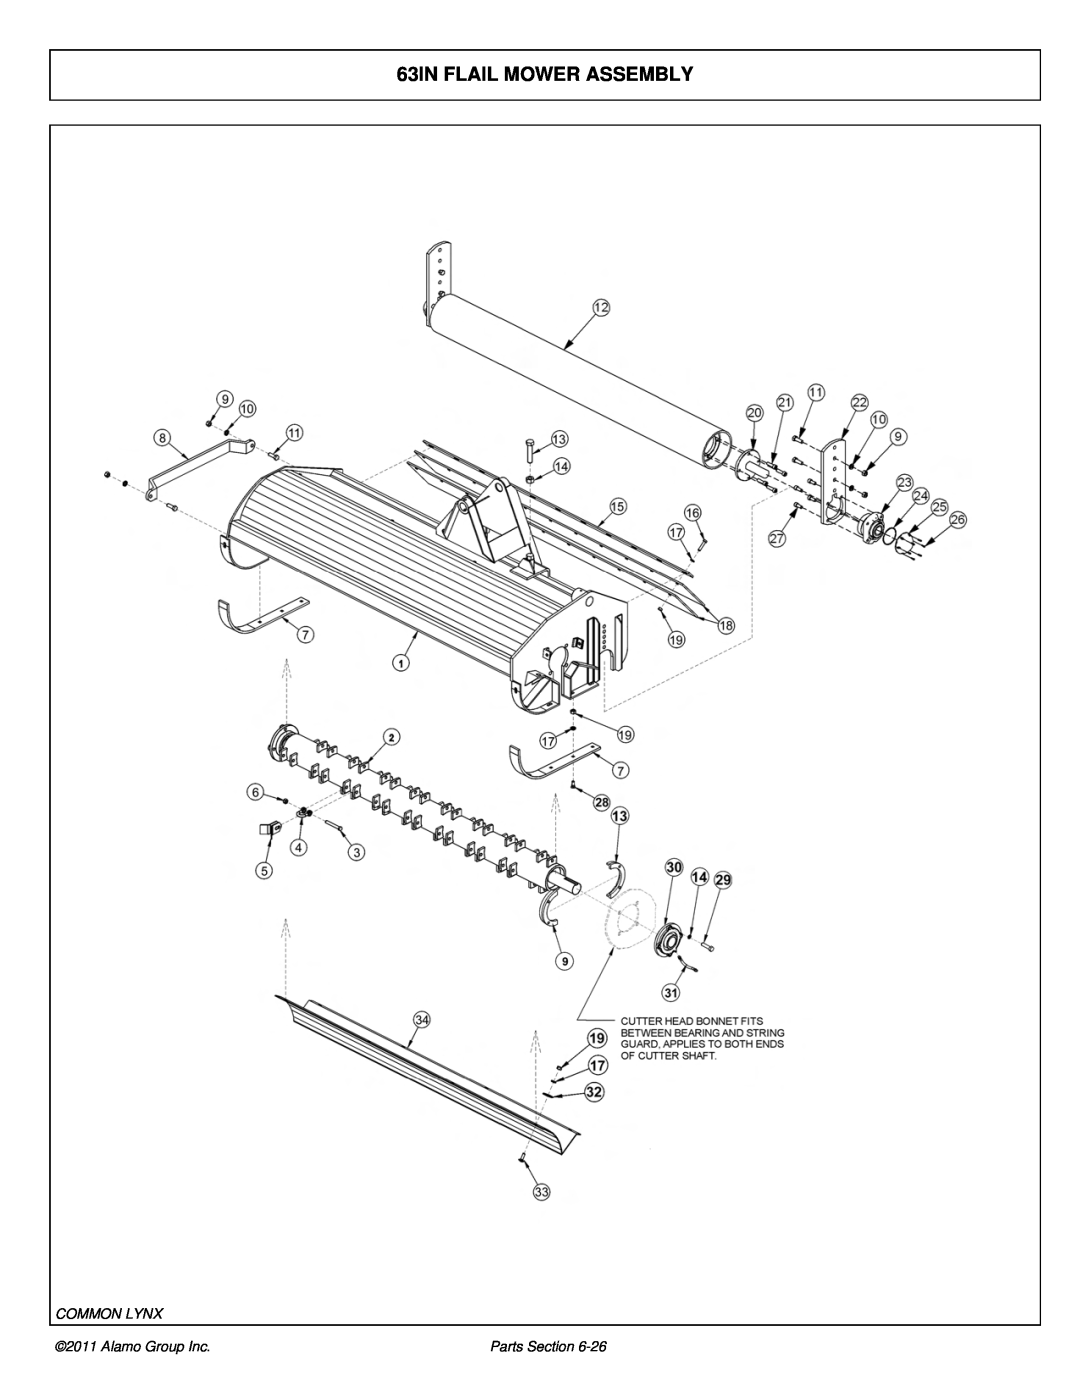 Tiger Products Co., Ltd 5101E, 5083E, 5093E manual 63IN FLAIL MOWER ASSEMBLY, Common Lynx, Alamo Group Inc, Parts Section 